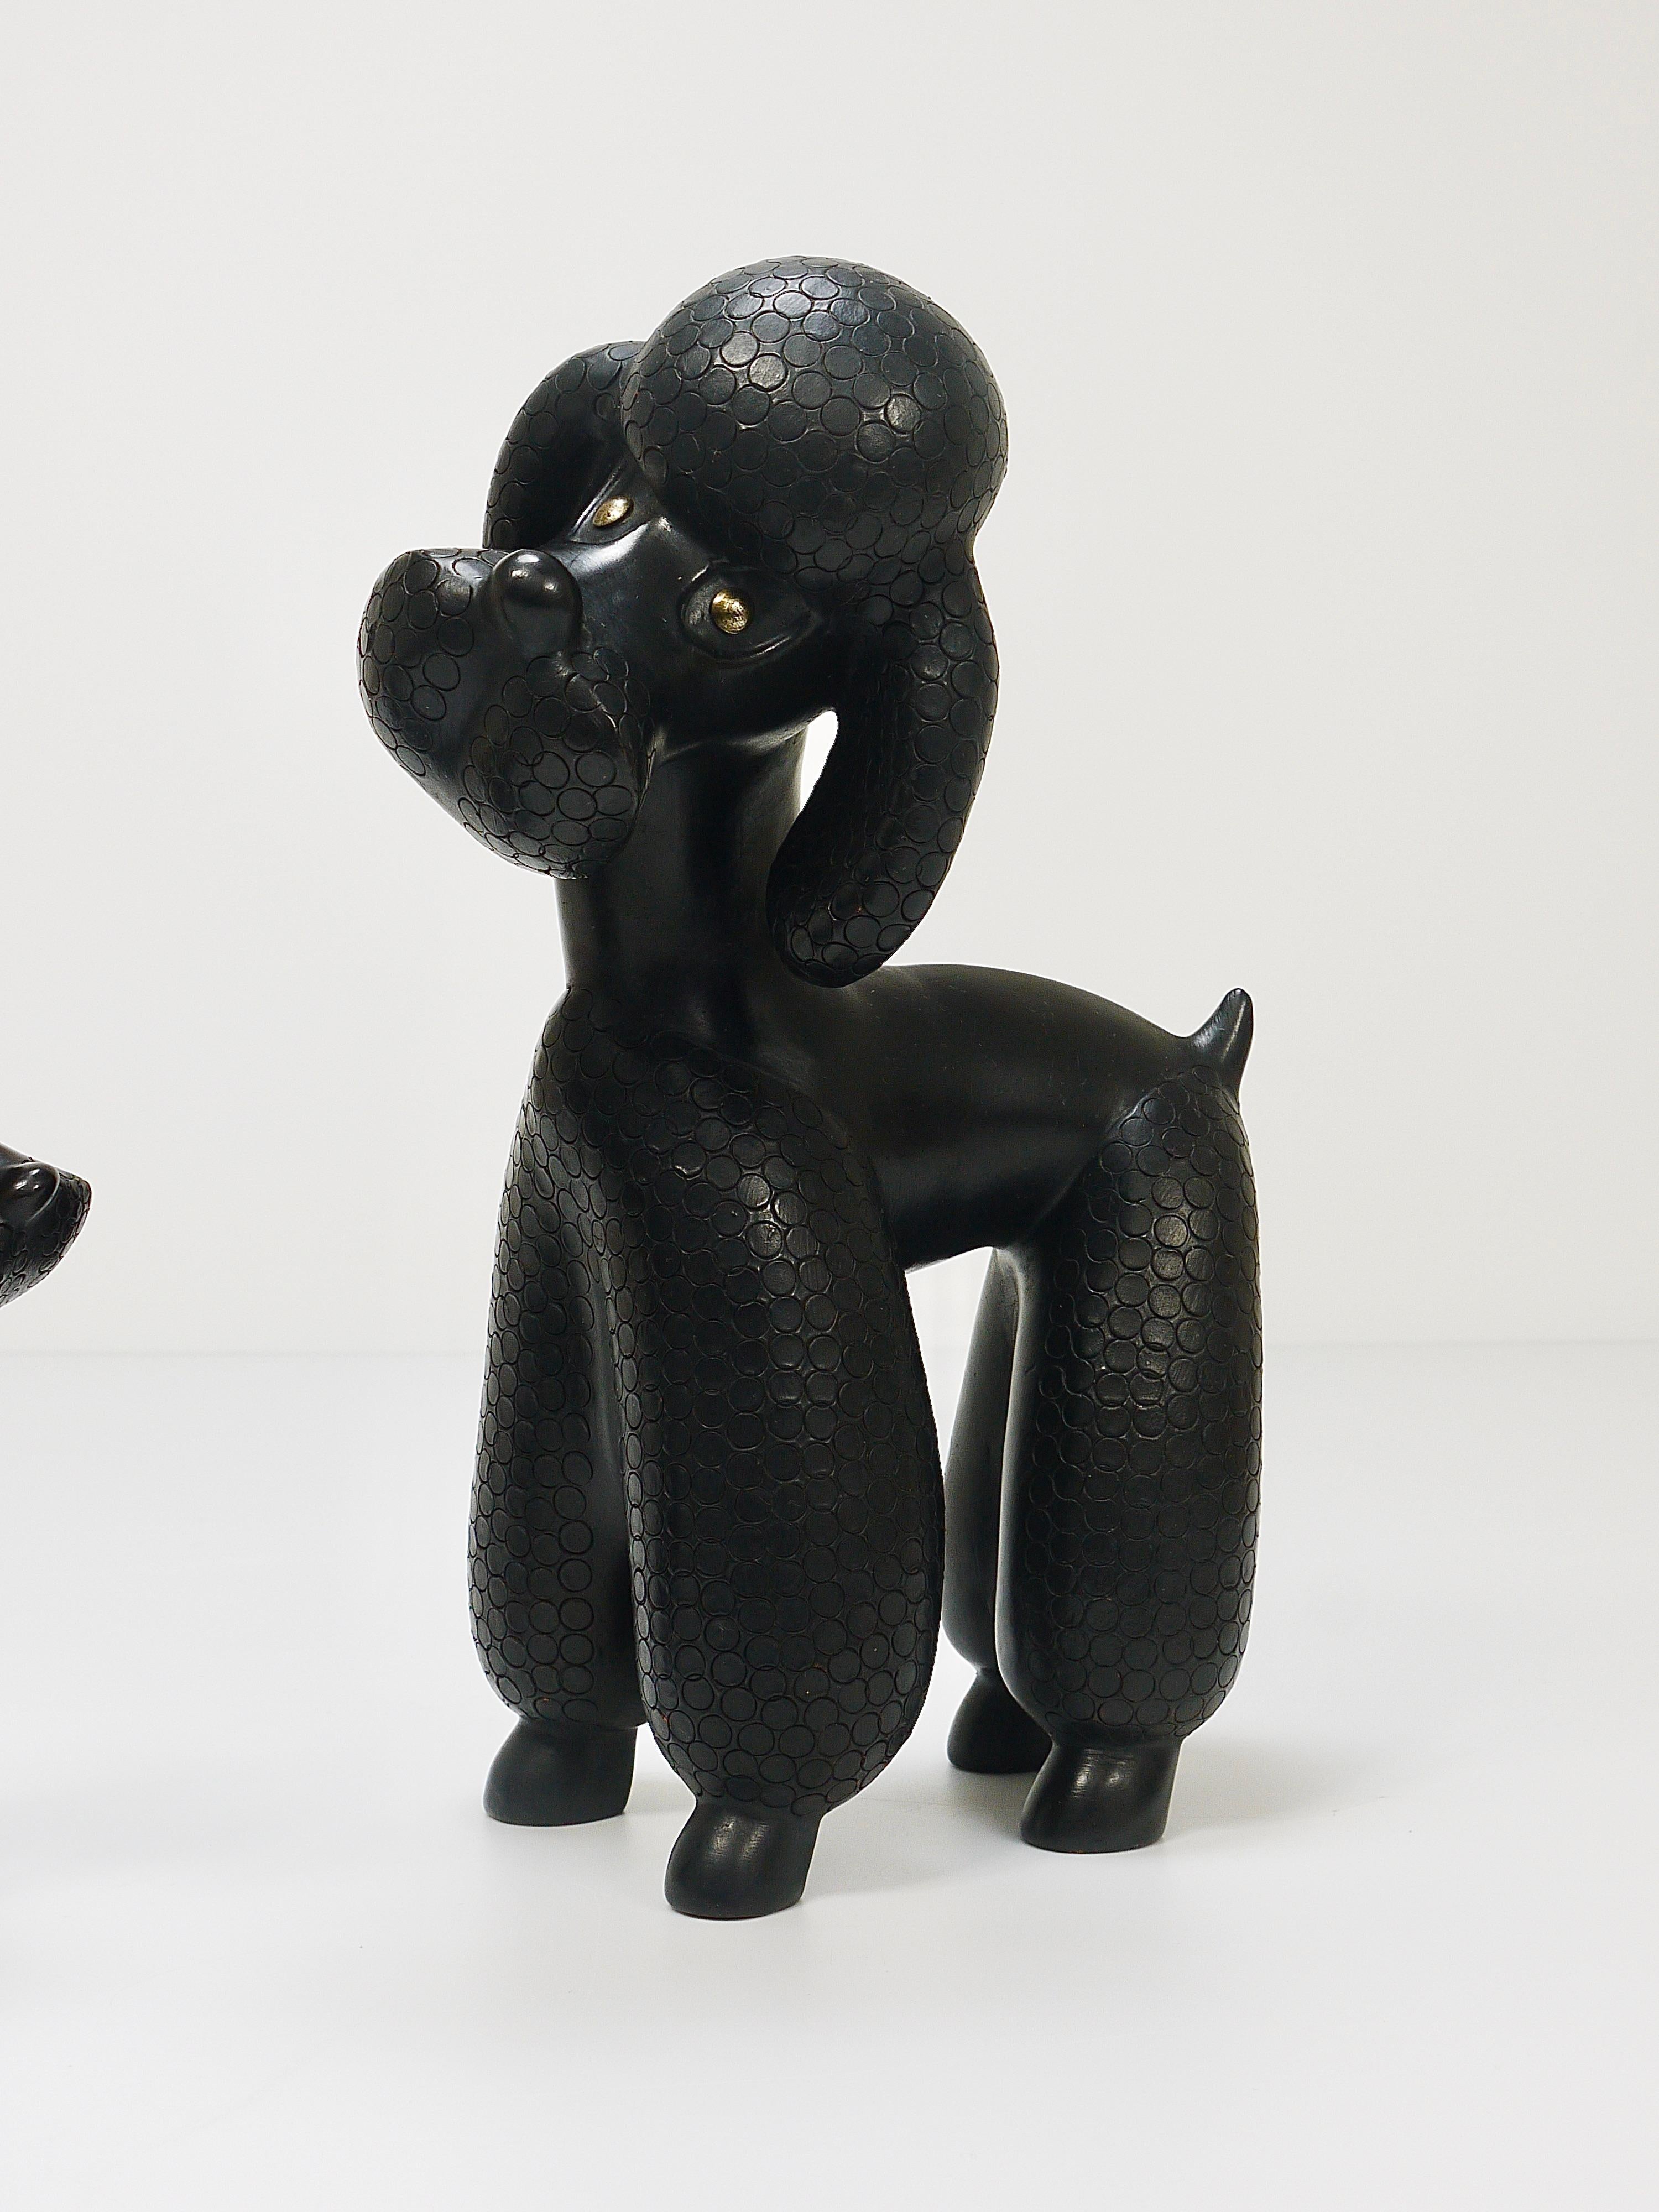 Pair of Mid-Century Dog Poodle Sculptures by Leopold Anzengruber, Austria, 1950s For Sale 2